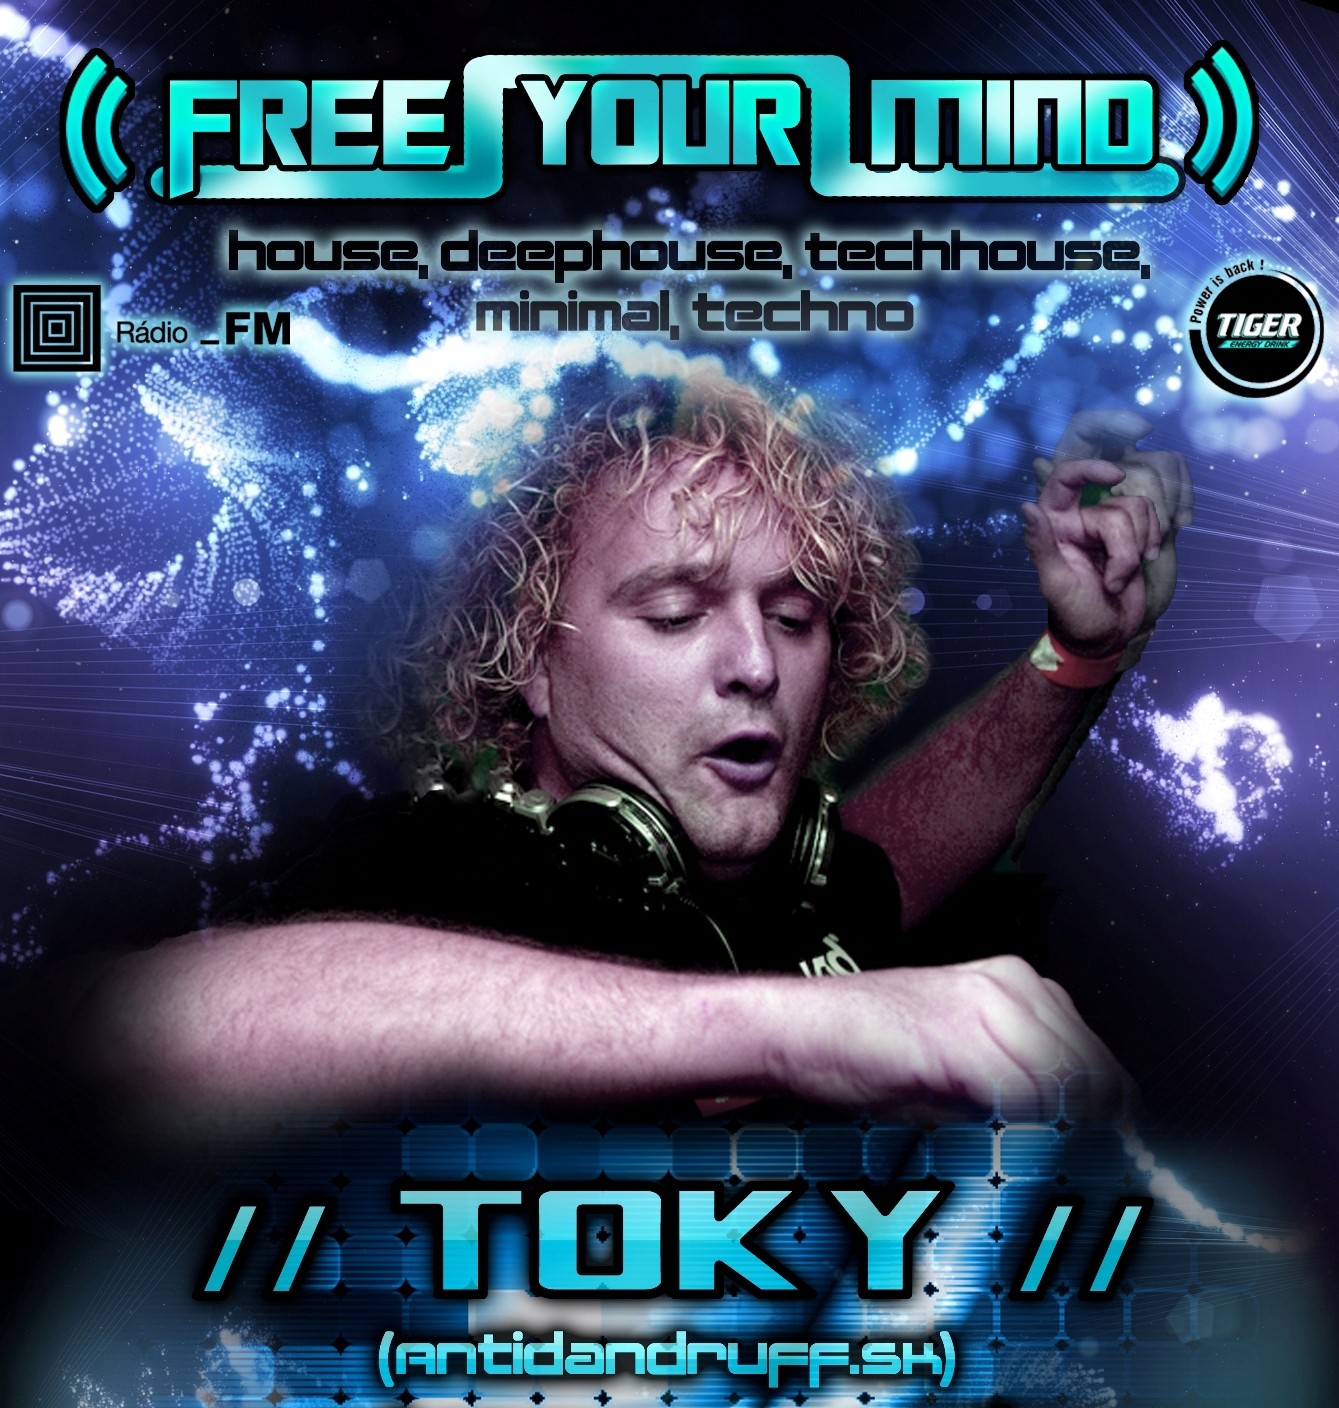 Free Your Mind @ TOKY